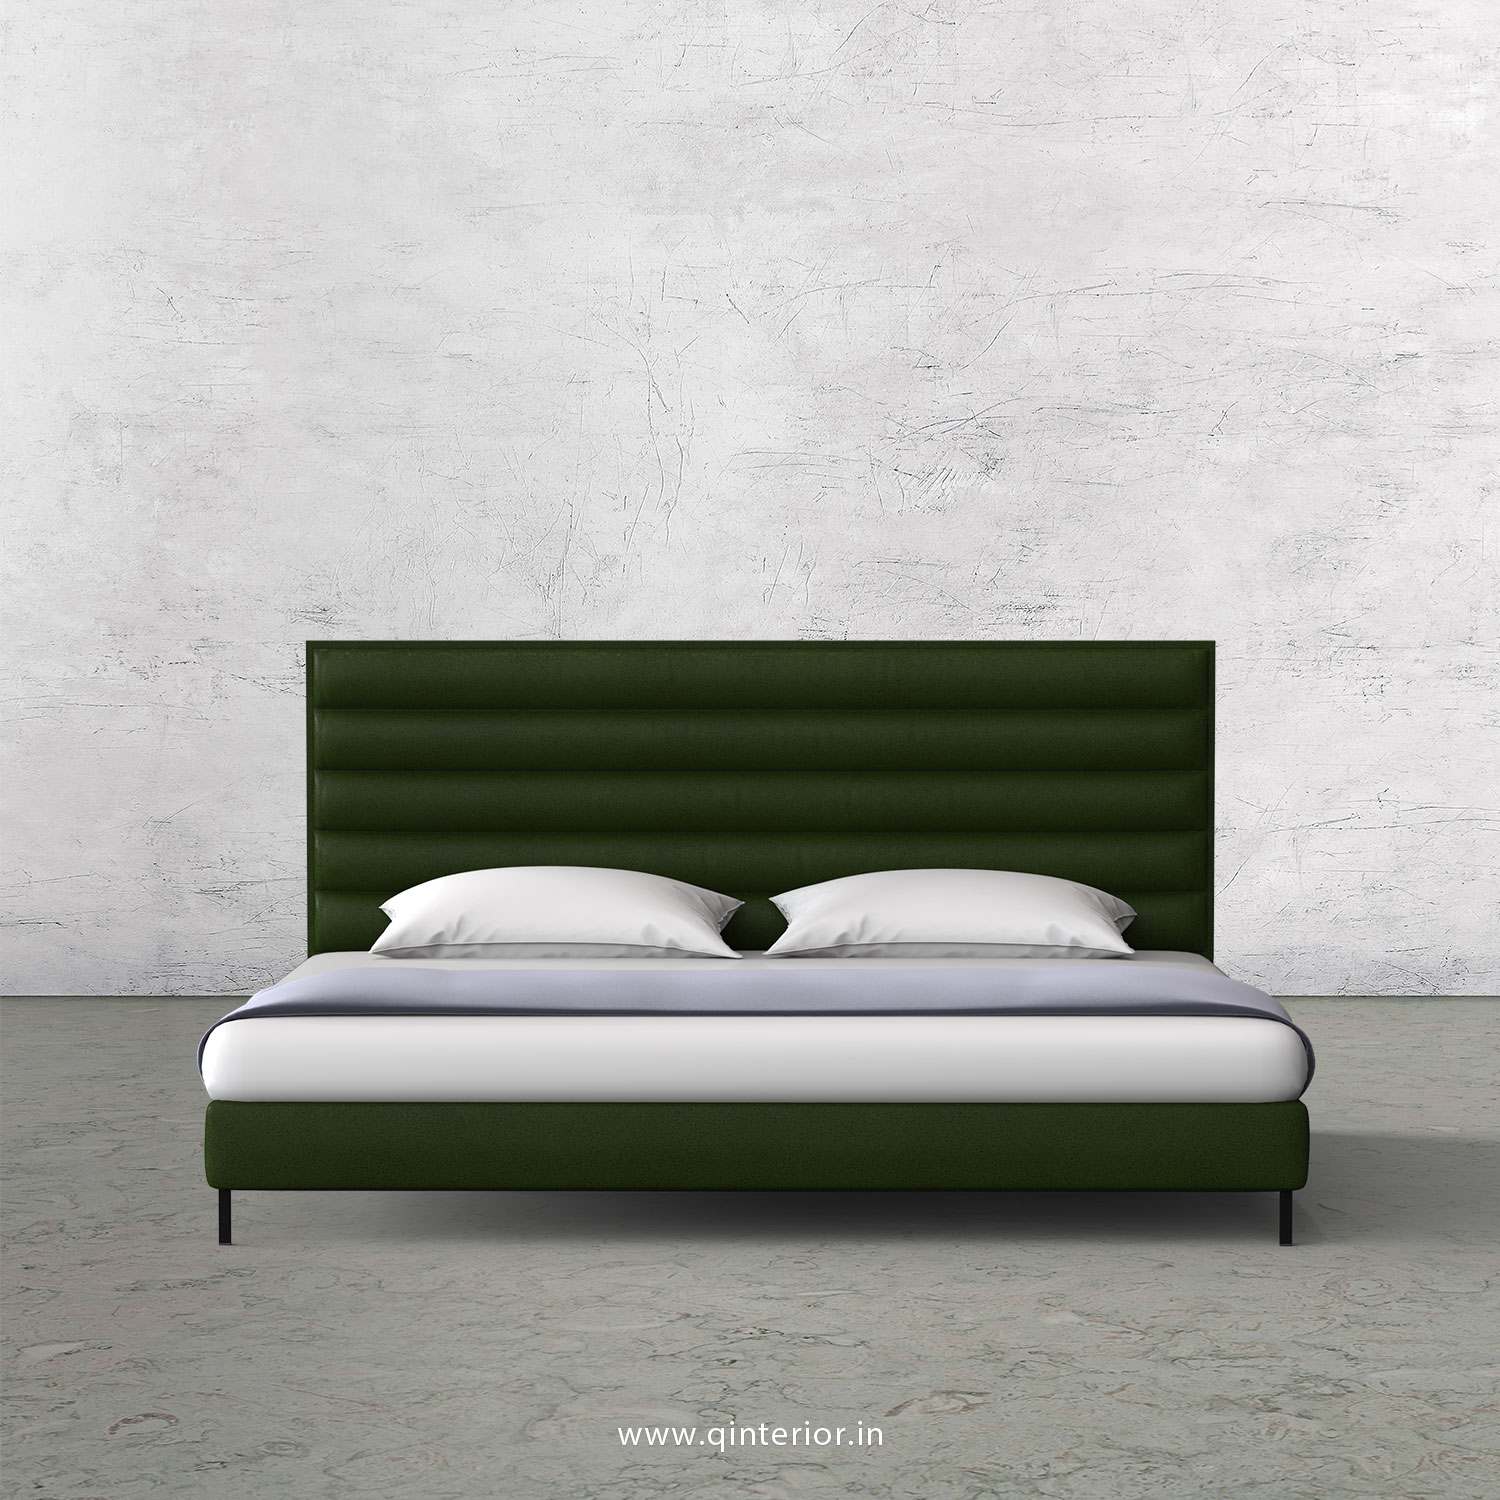 Crux King Size Bed in Fab Leather Fabric - KBD003 FL04